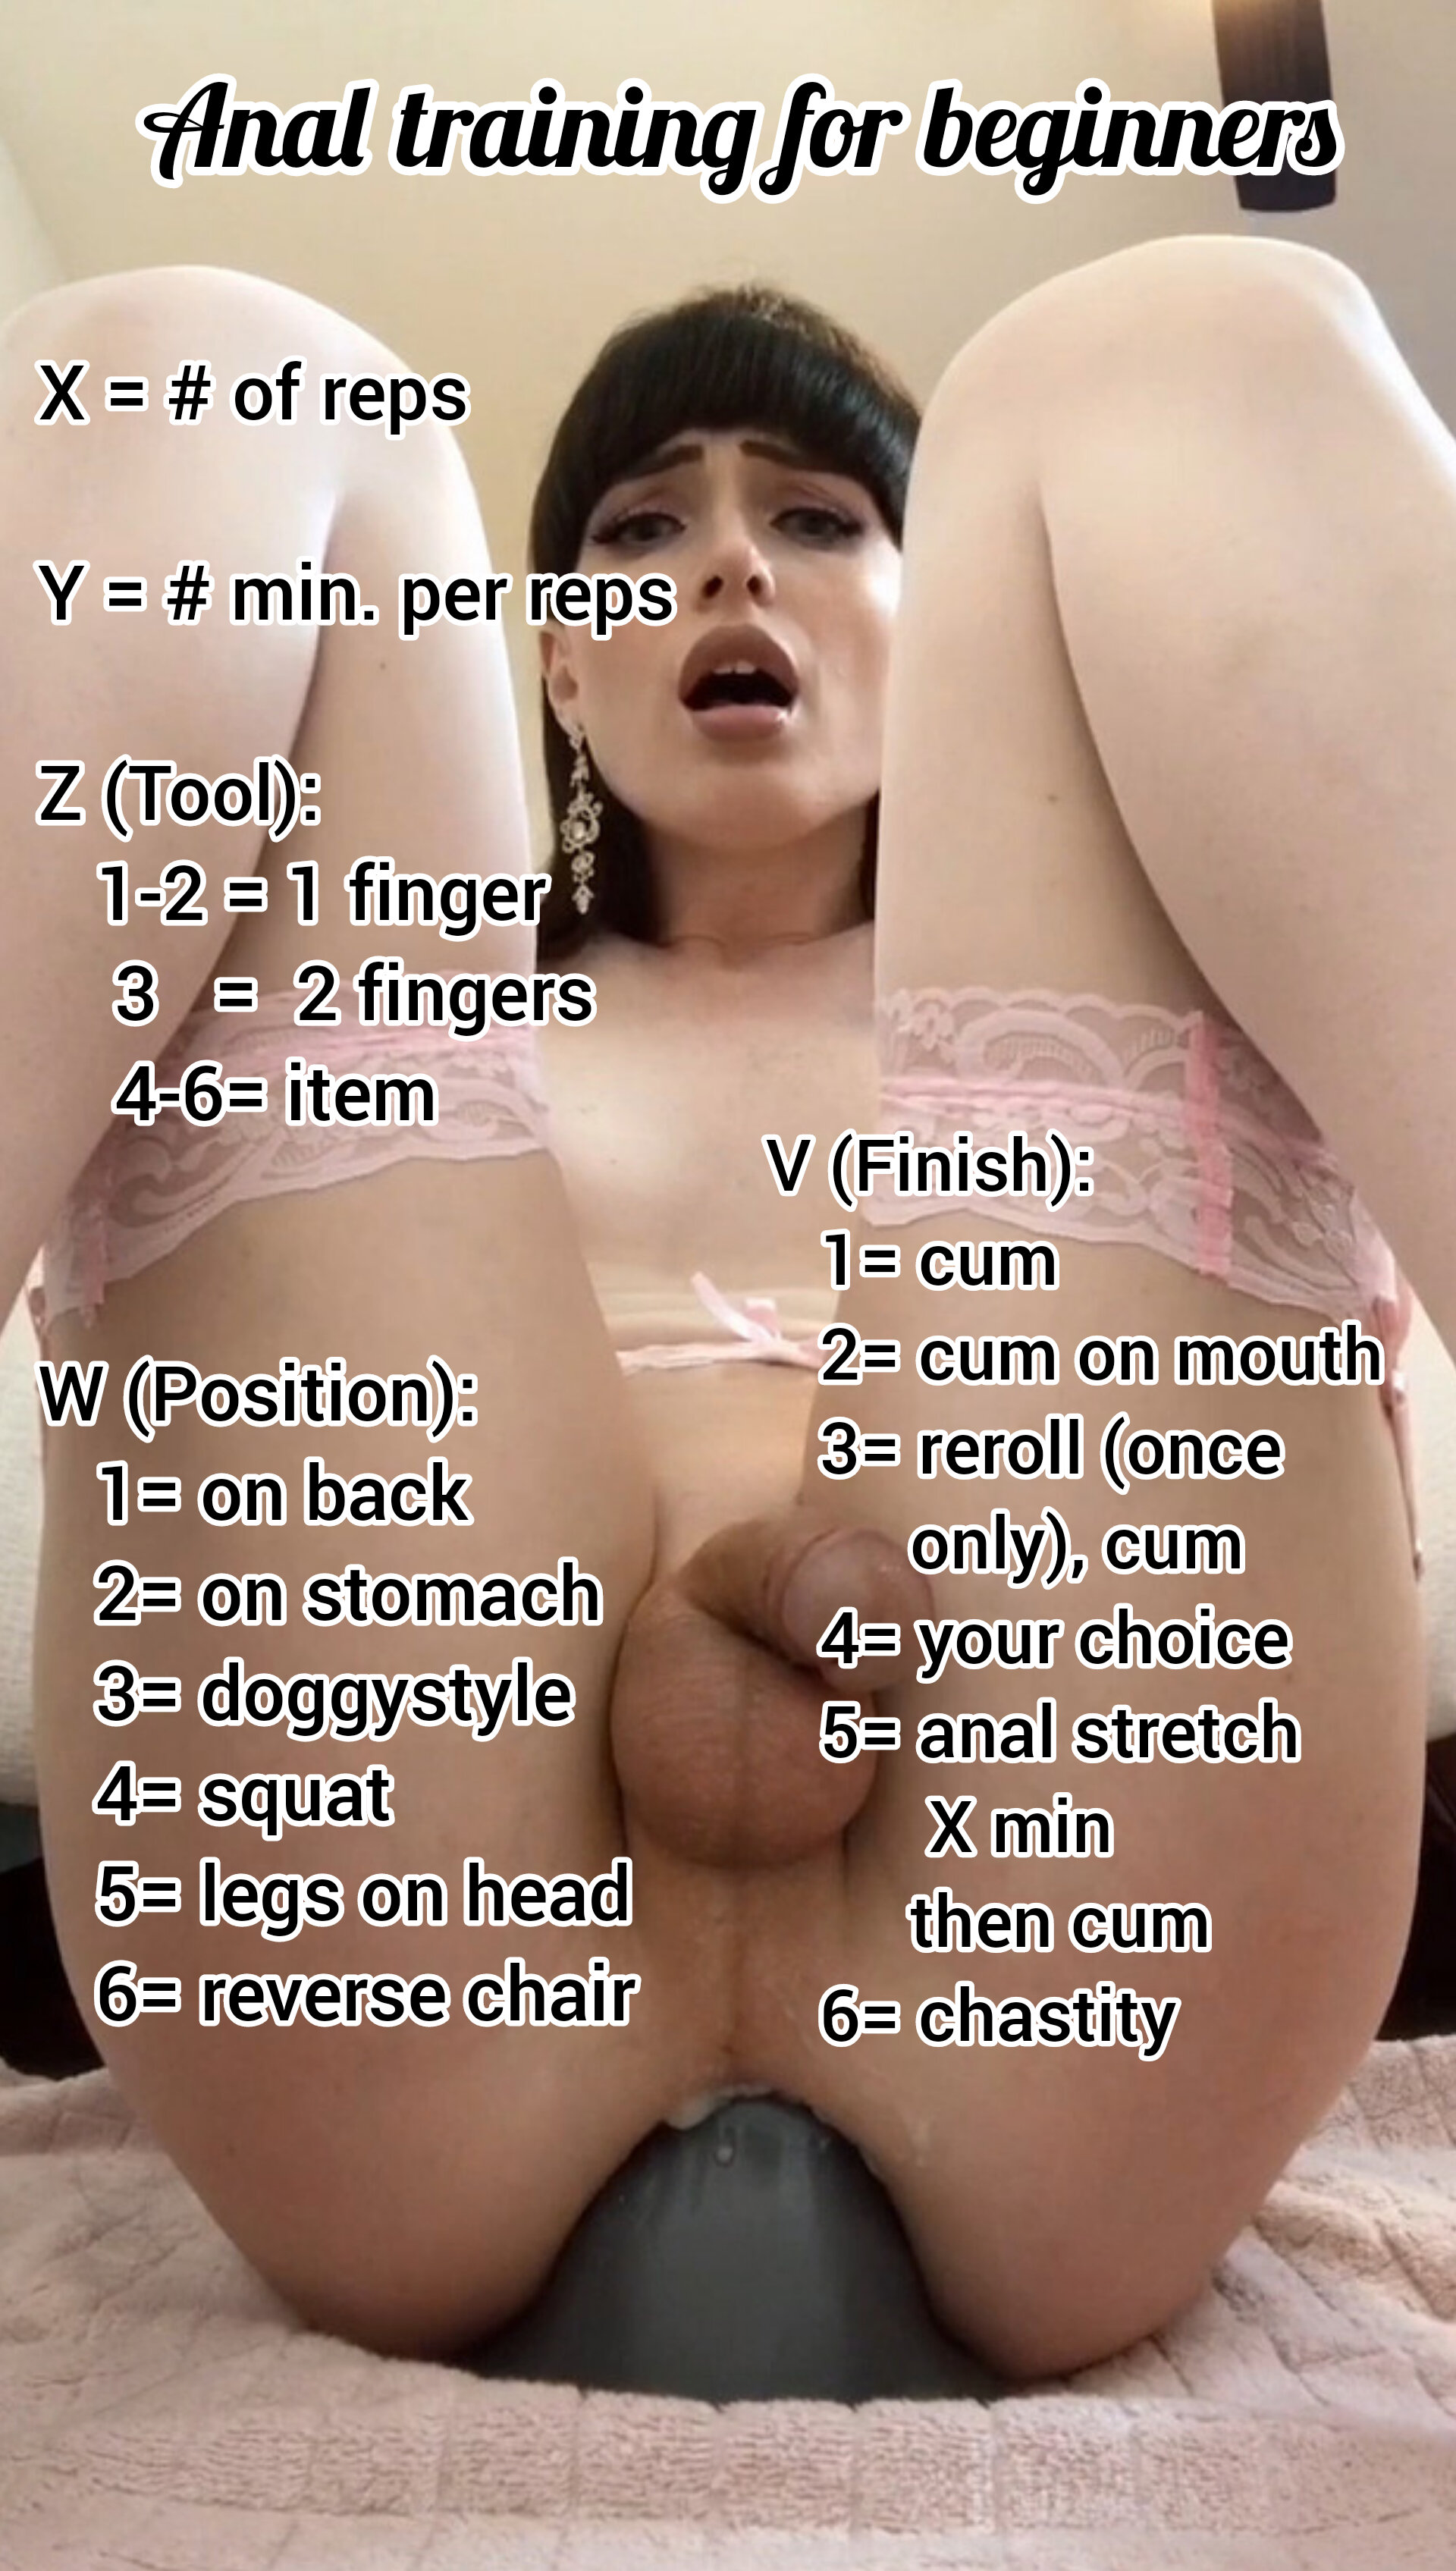 Anal training for beginners